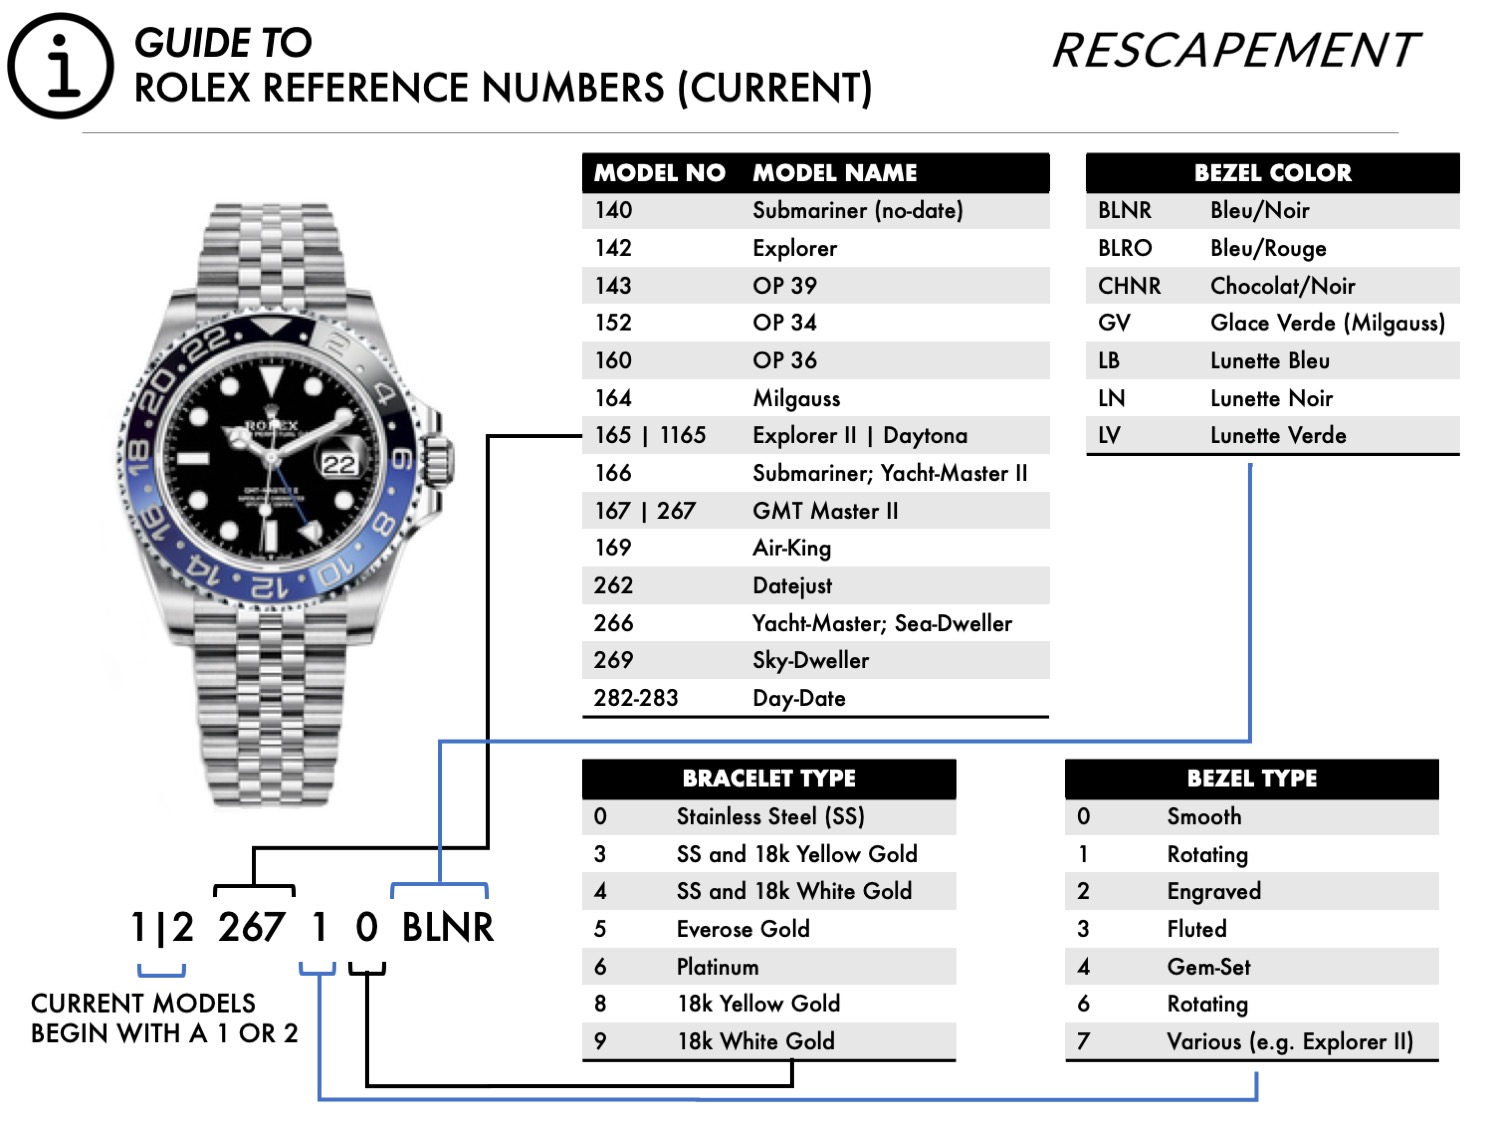 Rolex Reference A Guide — Rescapement.